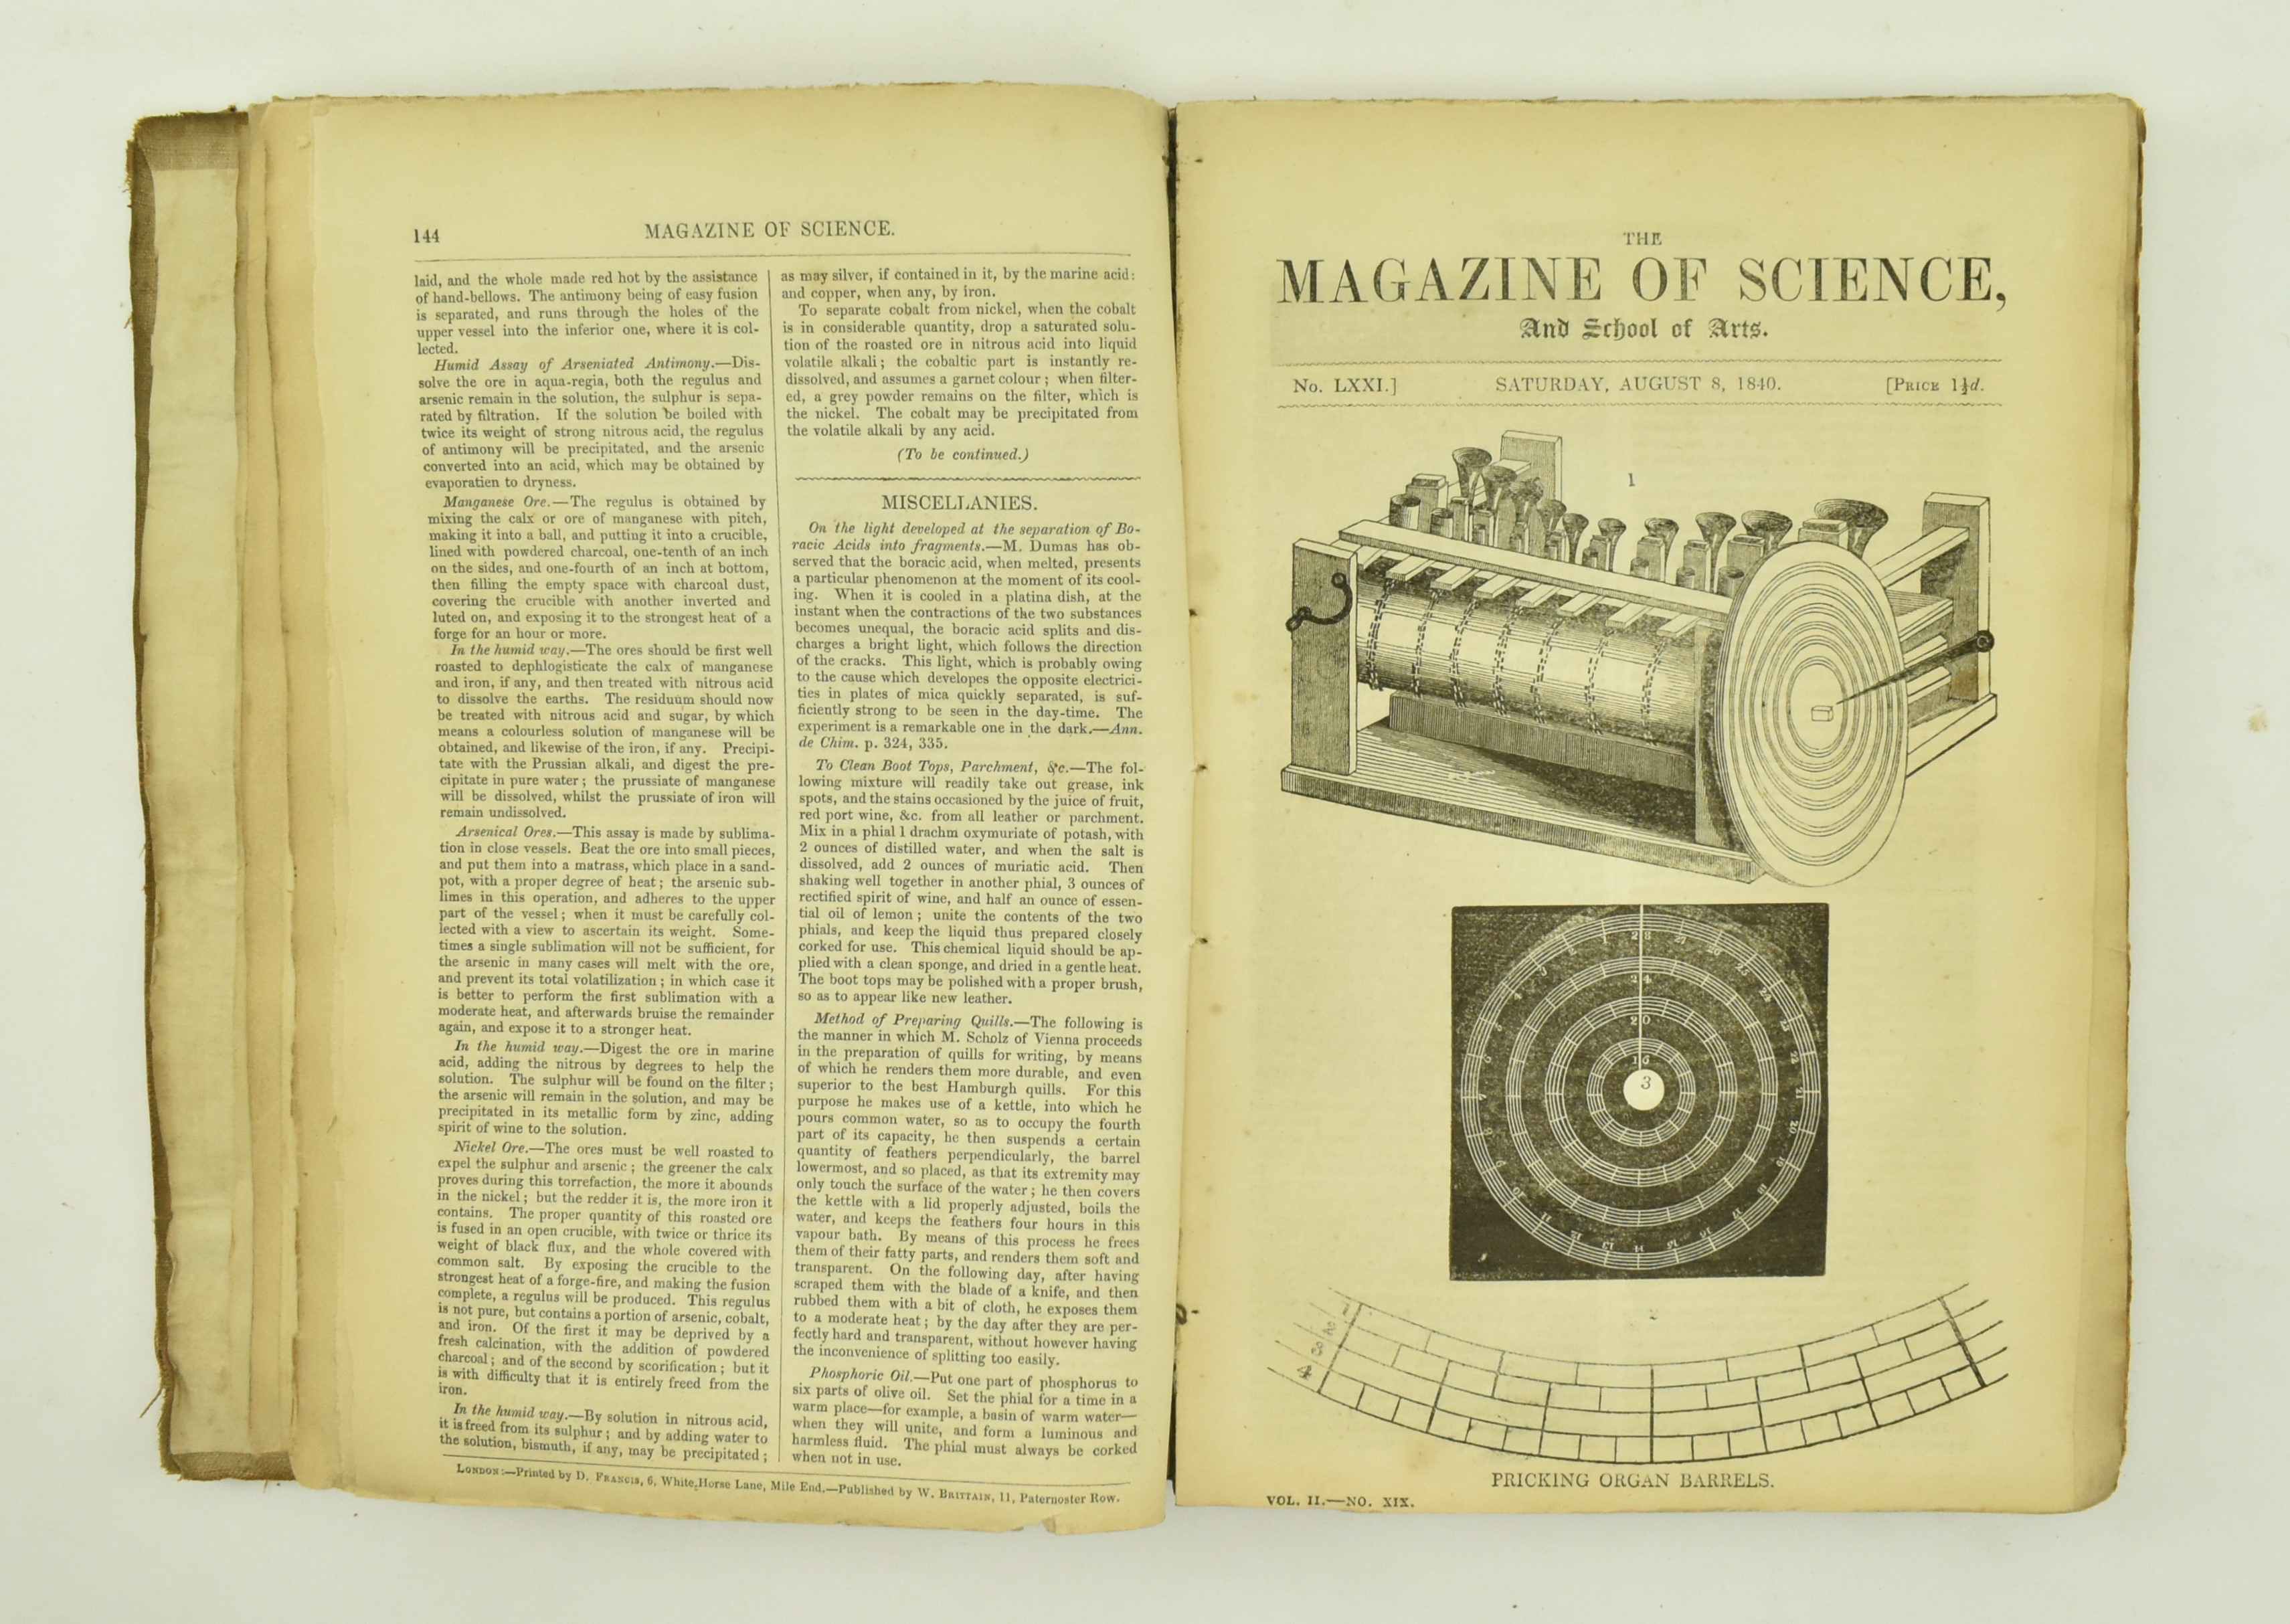 1840 MAGAZINE OF SCIENCE, JULY 4TH - DECEMBER 26TH, BOUND - Image 5 of 7